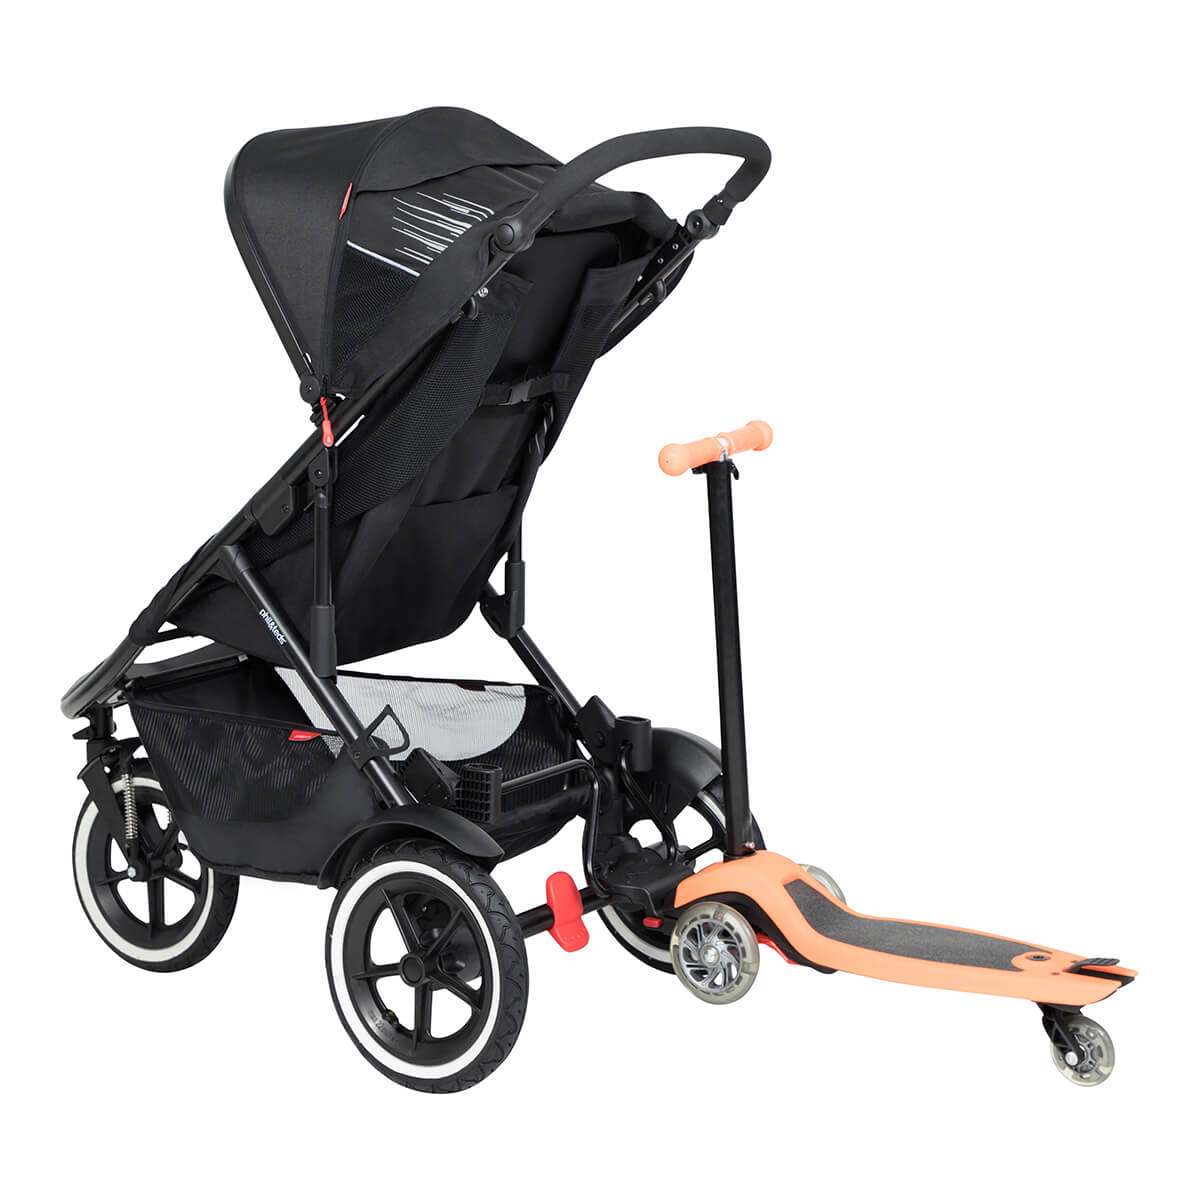 https://cdn.accentuate.io/4509527113816/19272668348504/philteds-sport-buggy-with-freerider-stroller-board-in-rear-v1626484326880.jpg?1200x1200